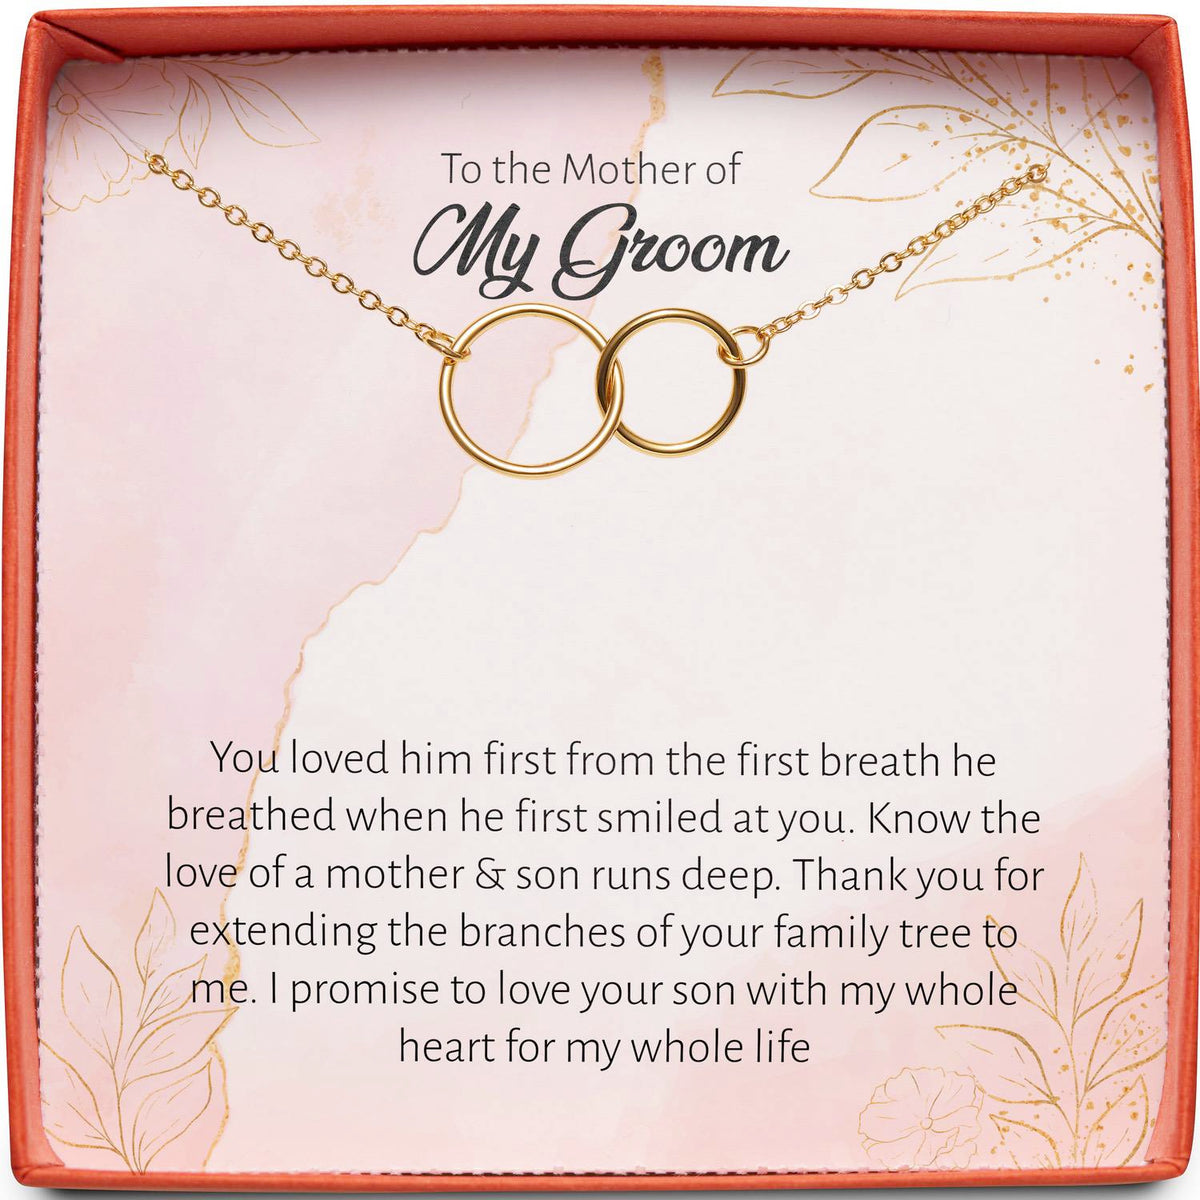 To the Mother of My Groom (From Bride) | First Breath | Interlocking Circles